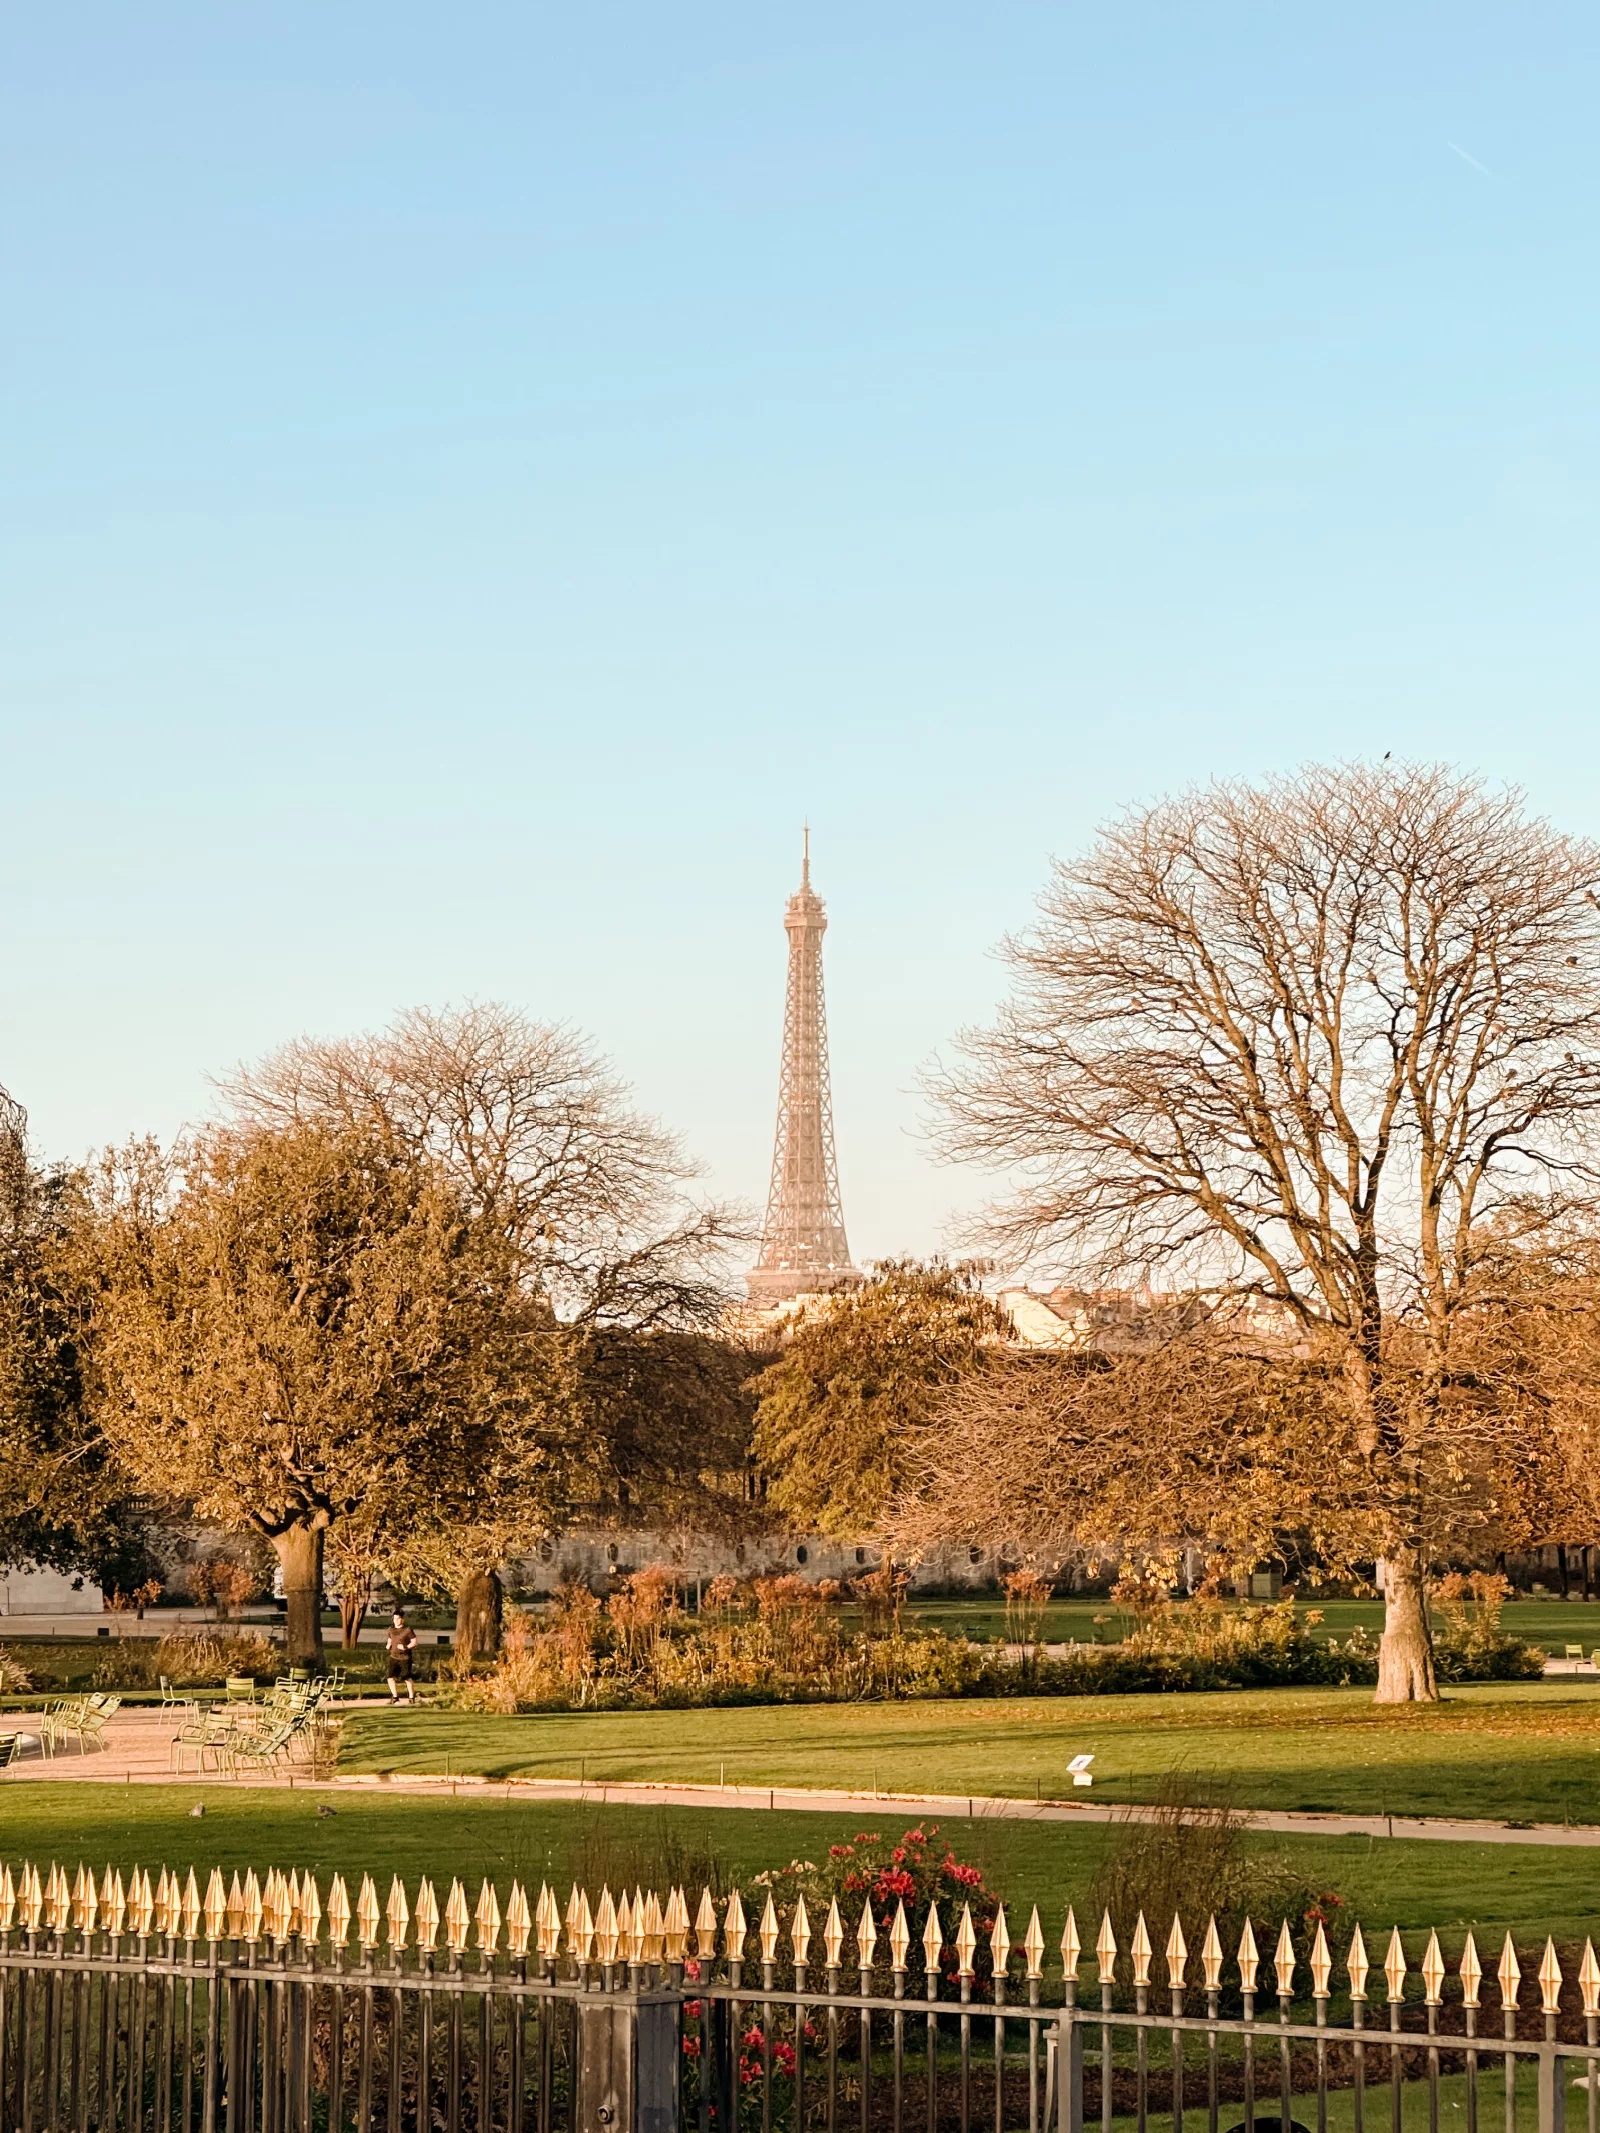 Eiffel Tower Views in Paris from the Tuileries